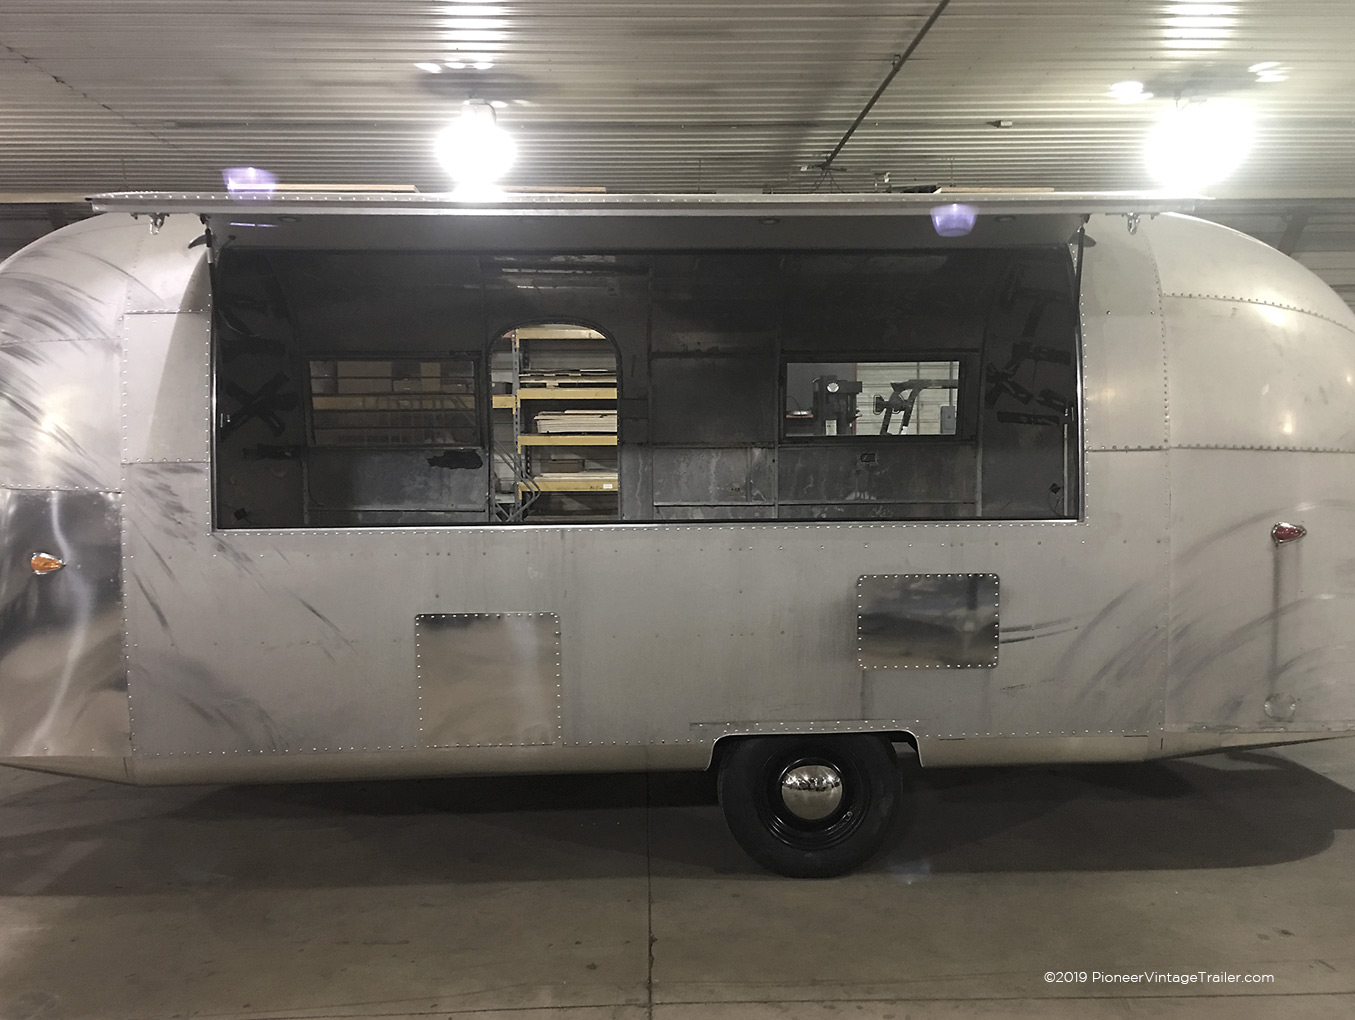 Airstream vending trailer with open serving window